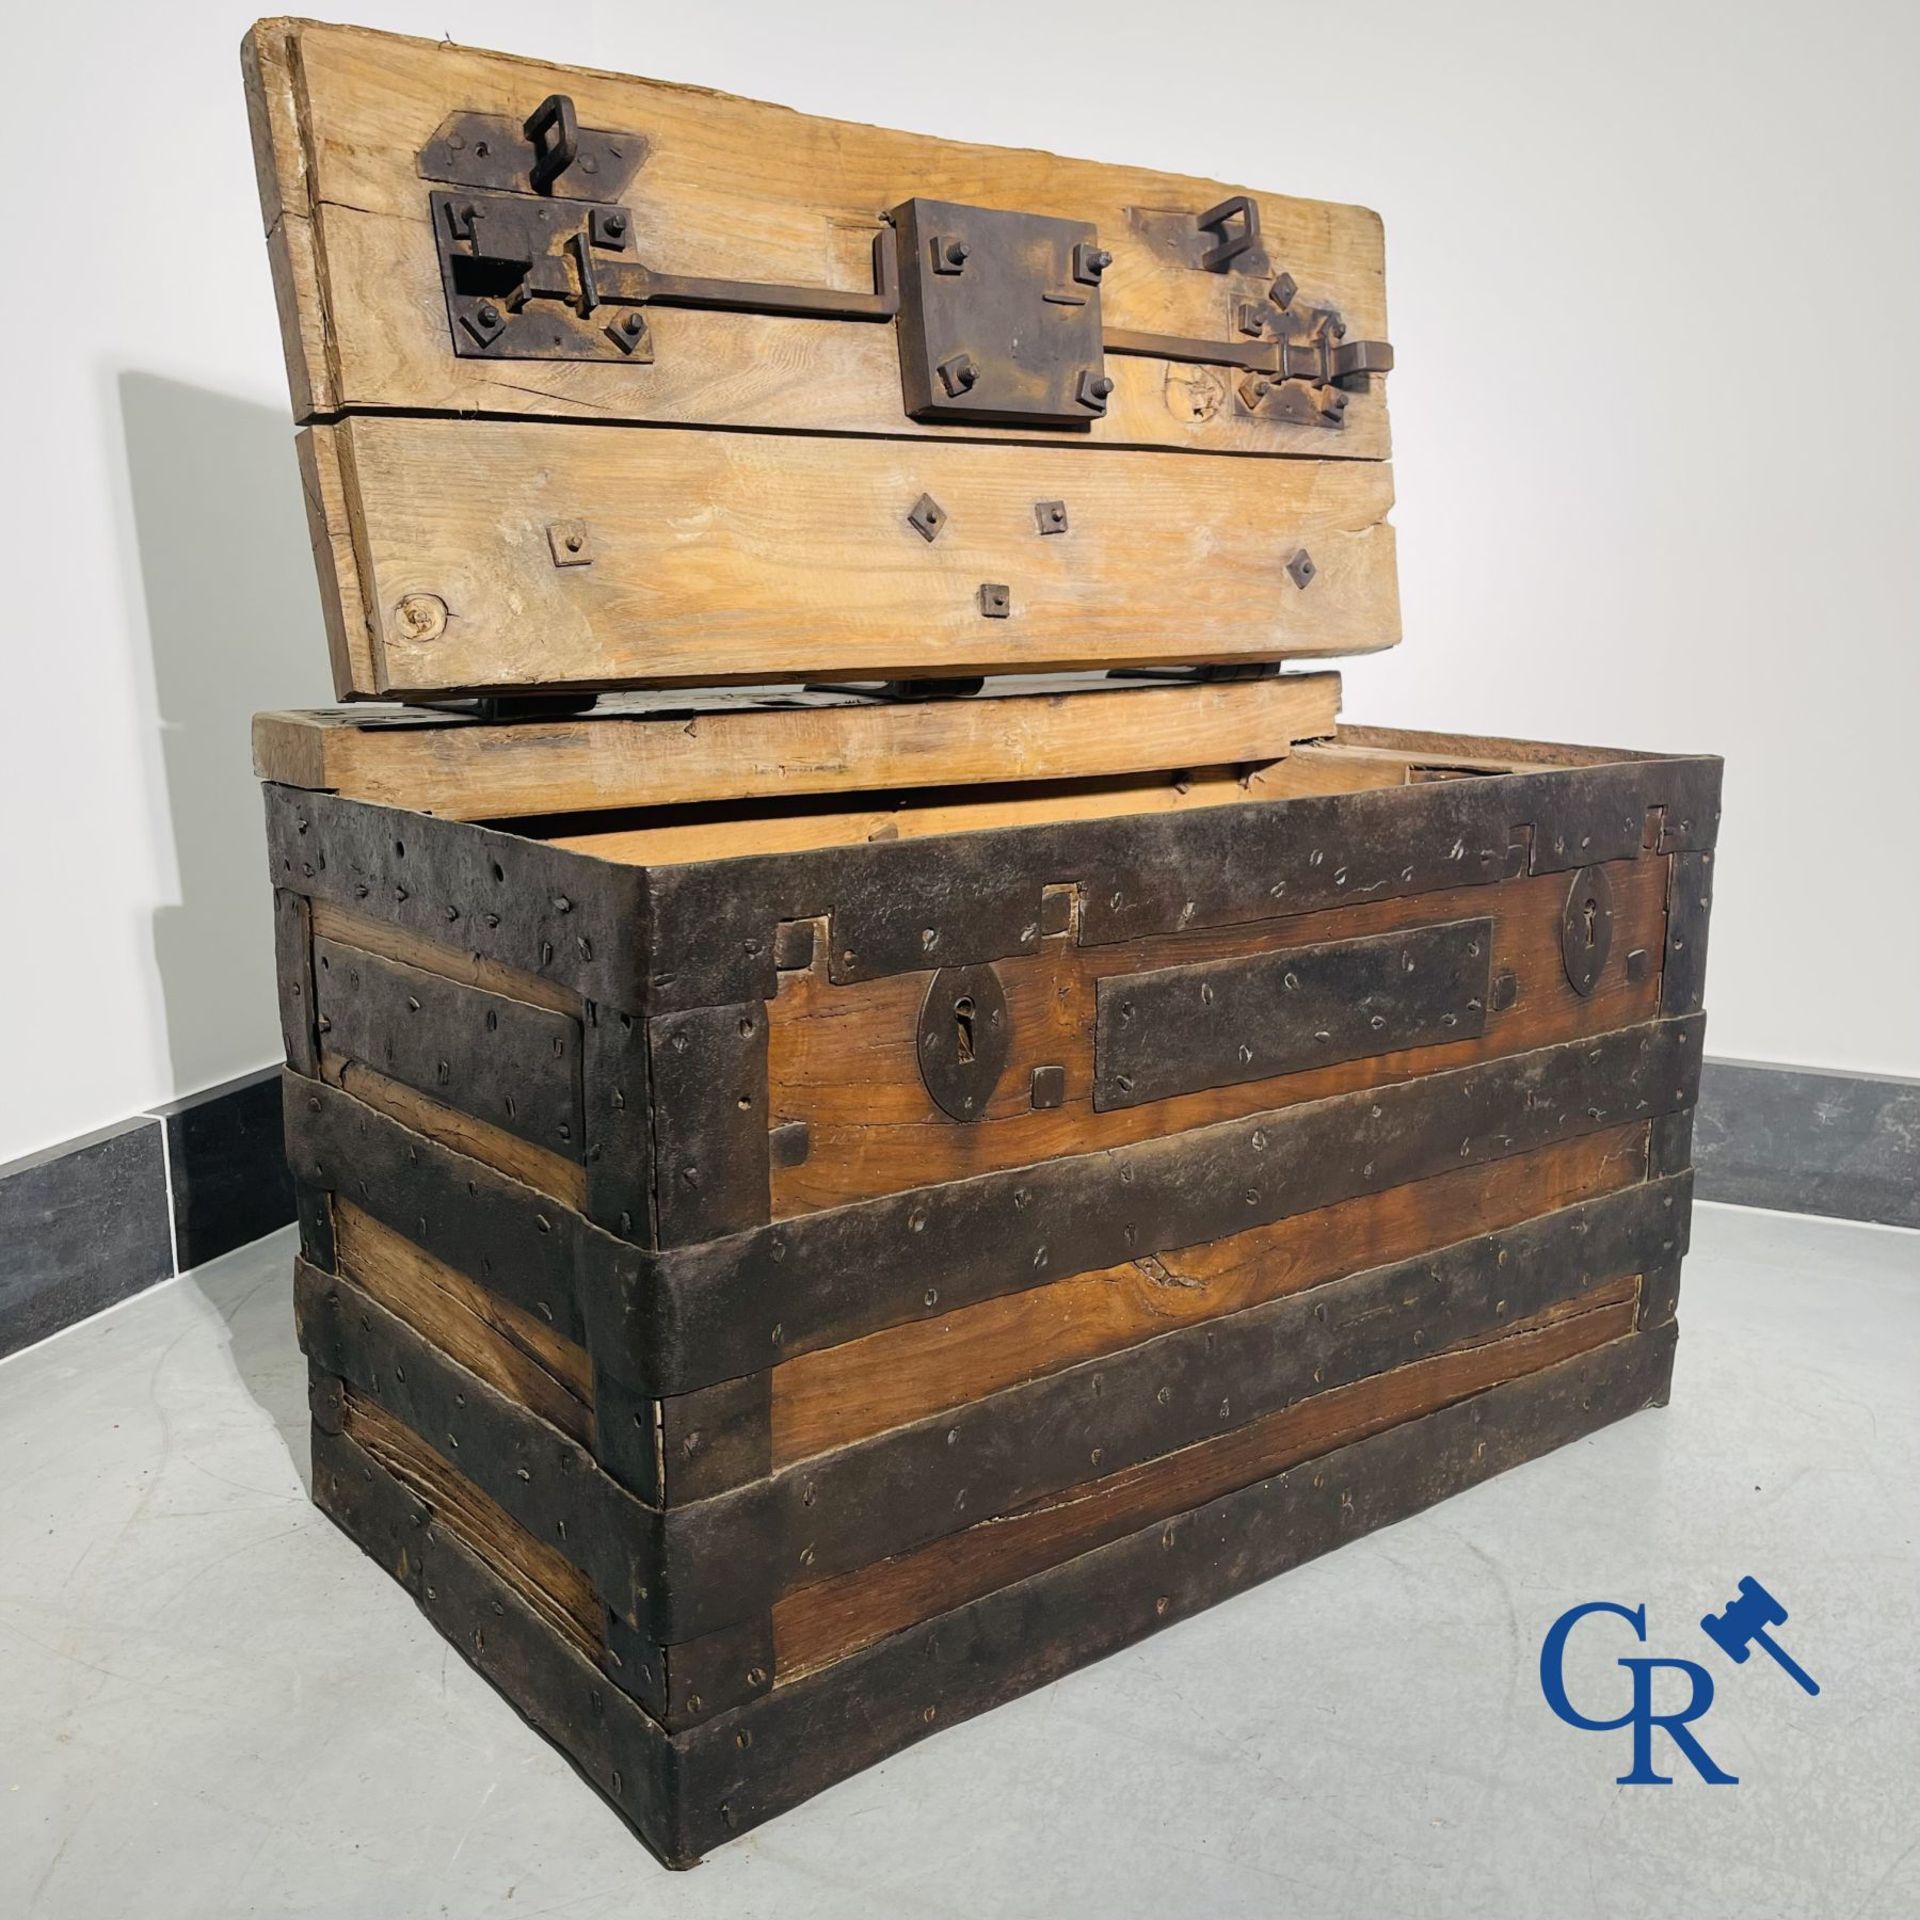 Antique wooden chest with hardware and lockwork in forging. - Image 2 of 21